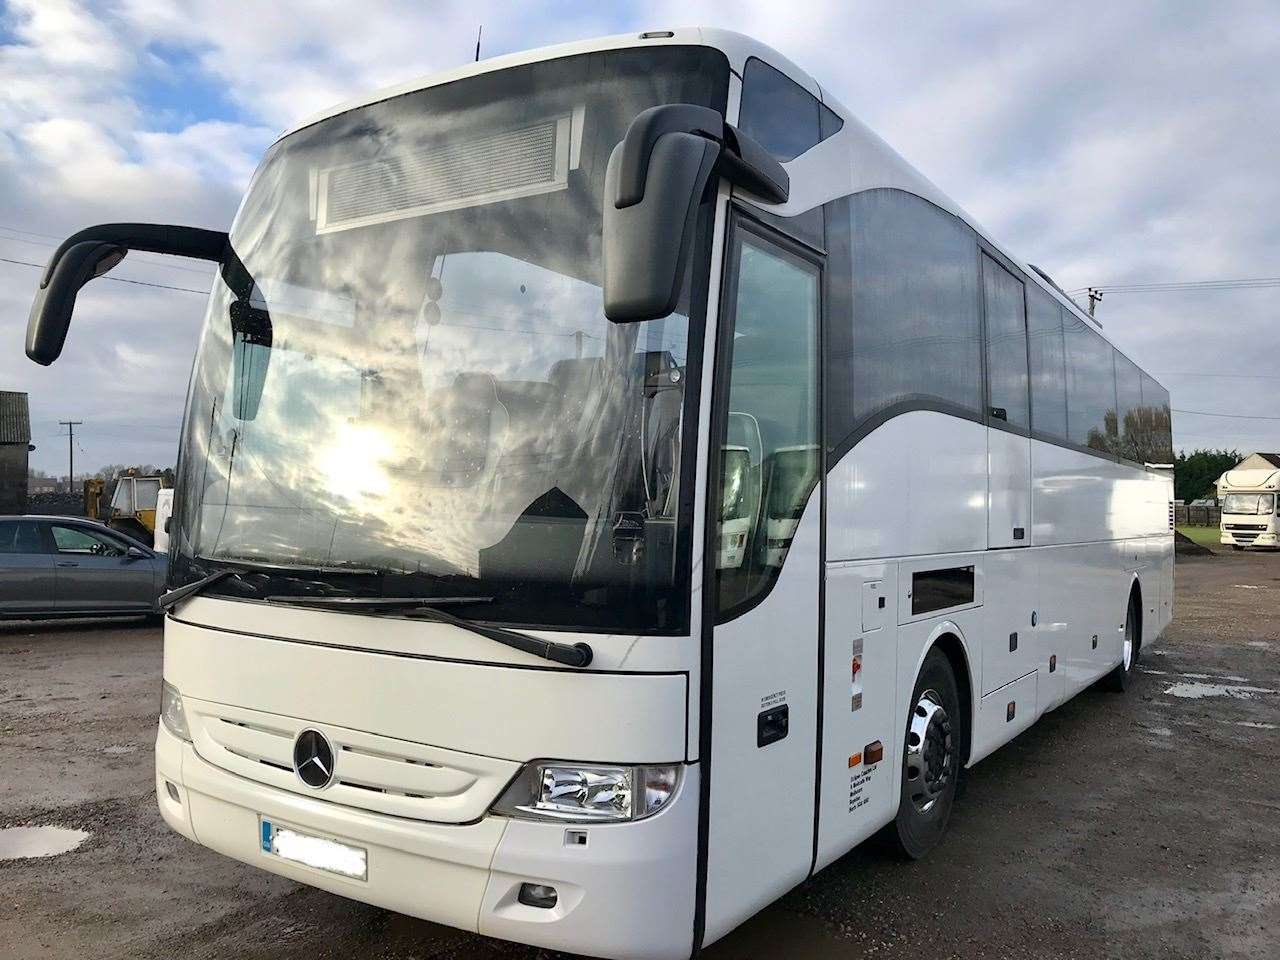 Aaron's of Wick will use a Mercedes Tourismo bus on the route